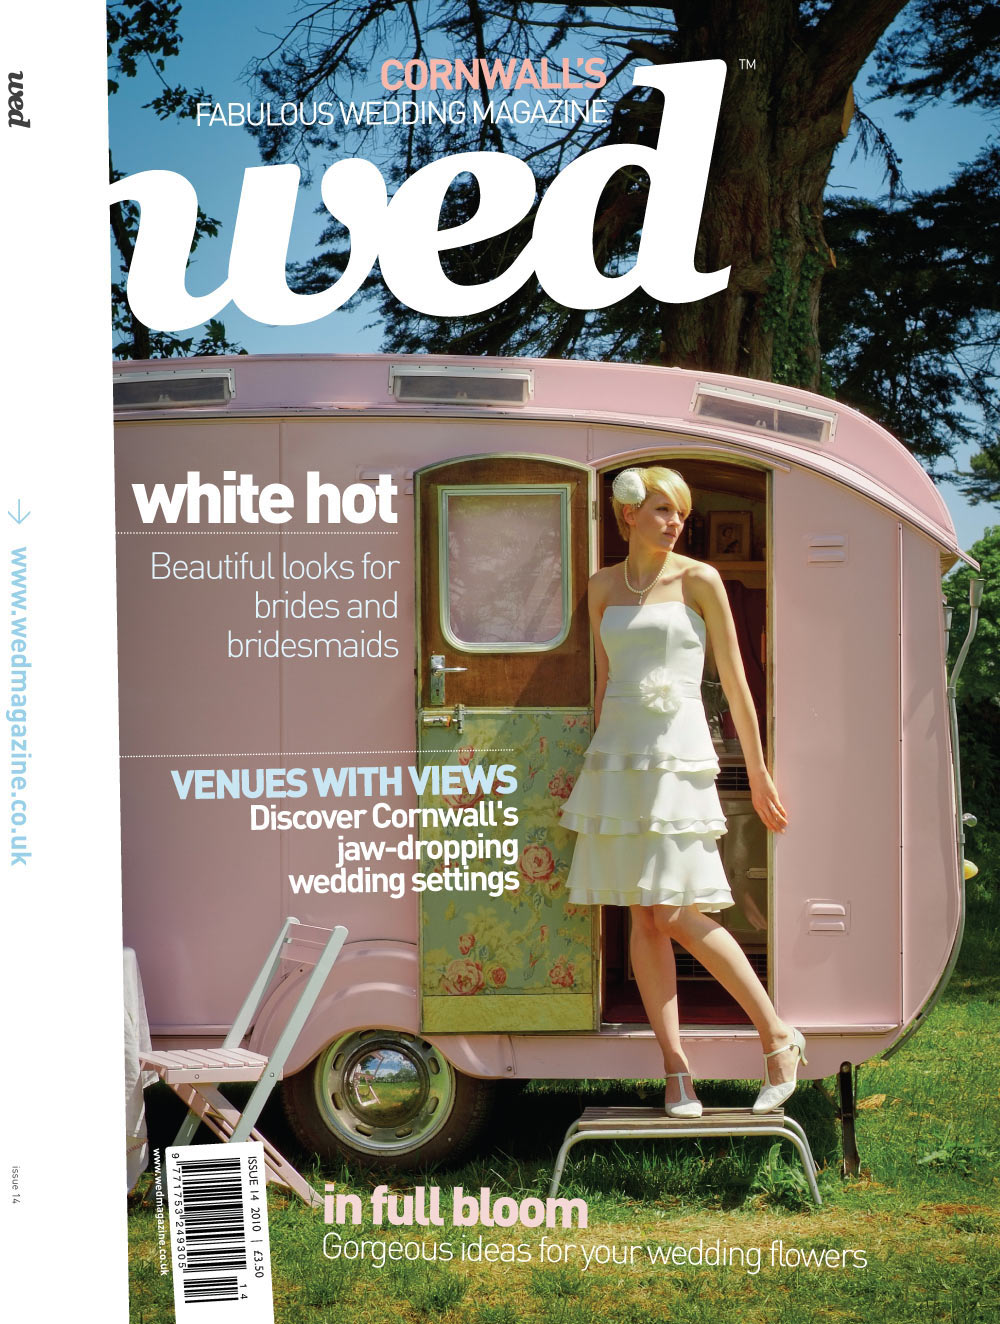 Cornwall Wed Issue 14 On The Way!